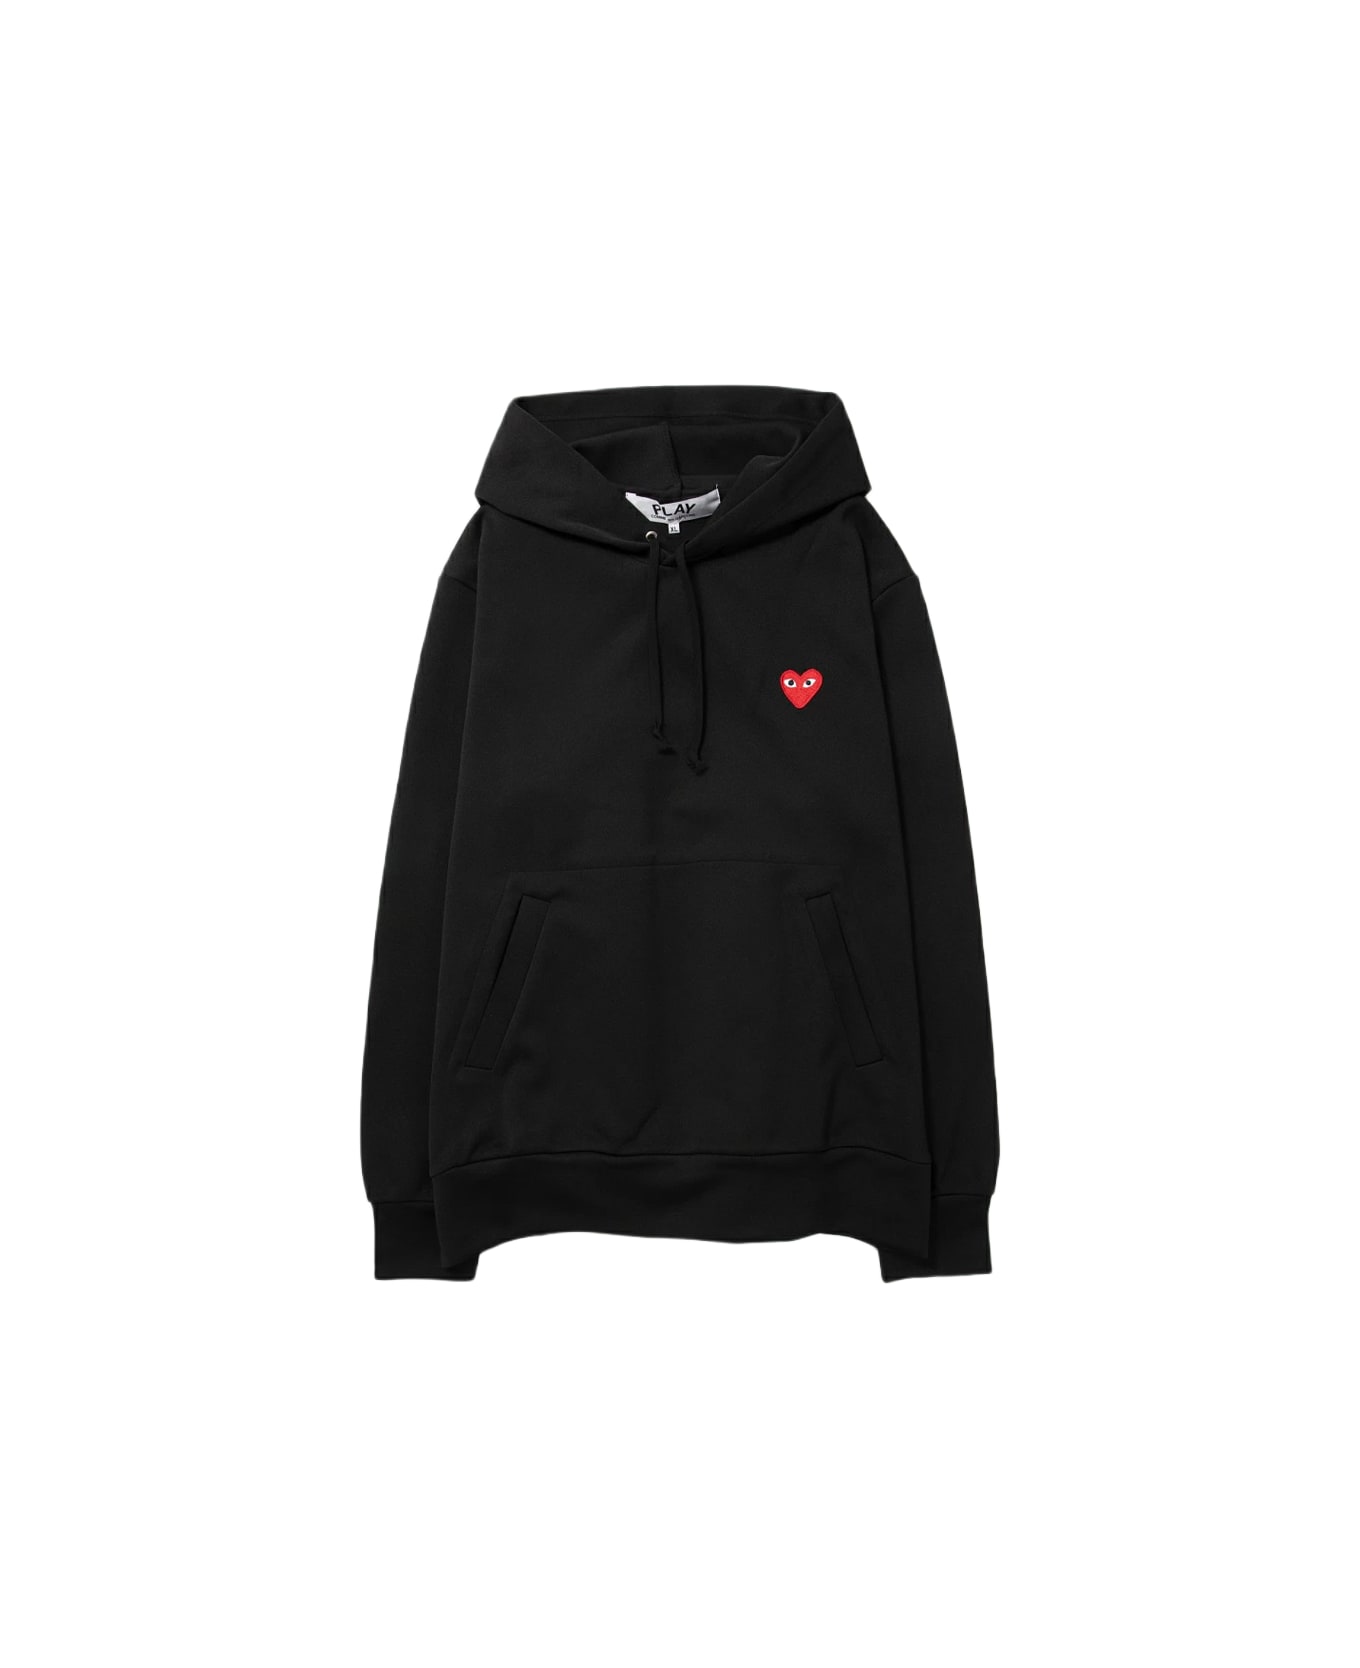 Comme des Garçons Play Mens Sweatshirt Knit Black hoodie with heart patch at chest - Nero フリース